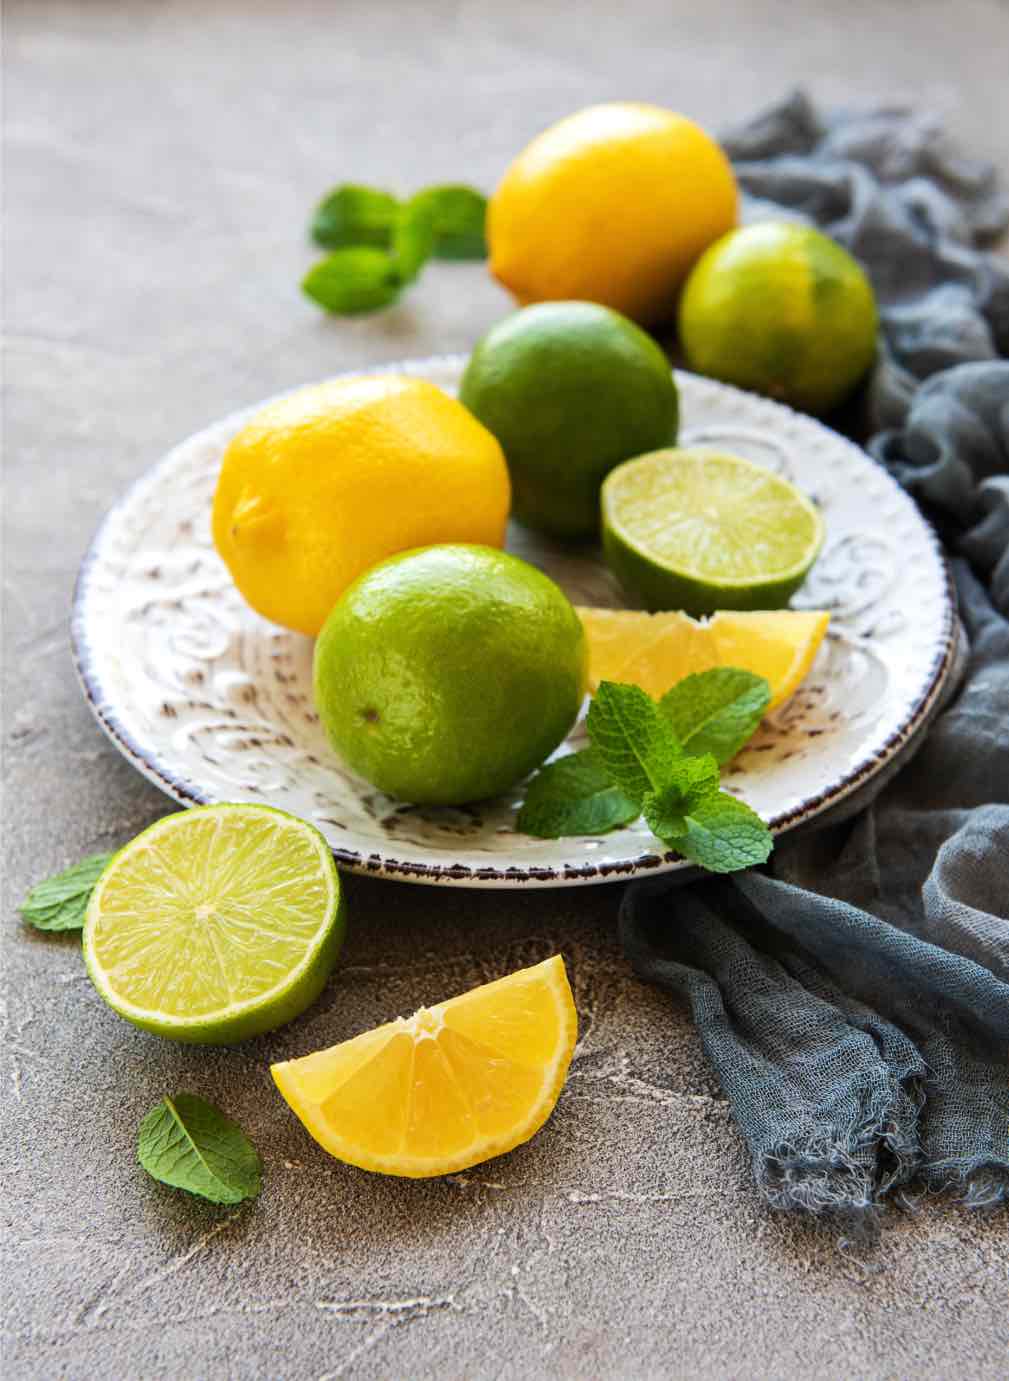 Lemons and limes are great for humans, but not for dogs - learn more with Dog Training Elite San Antonio!